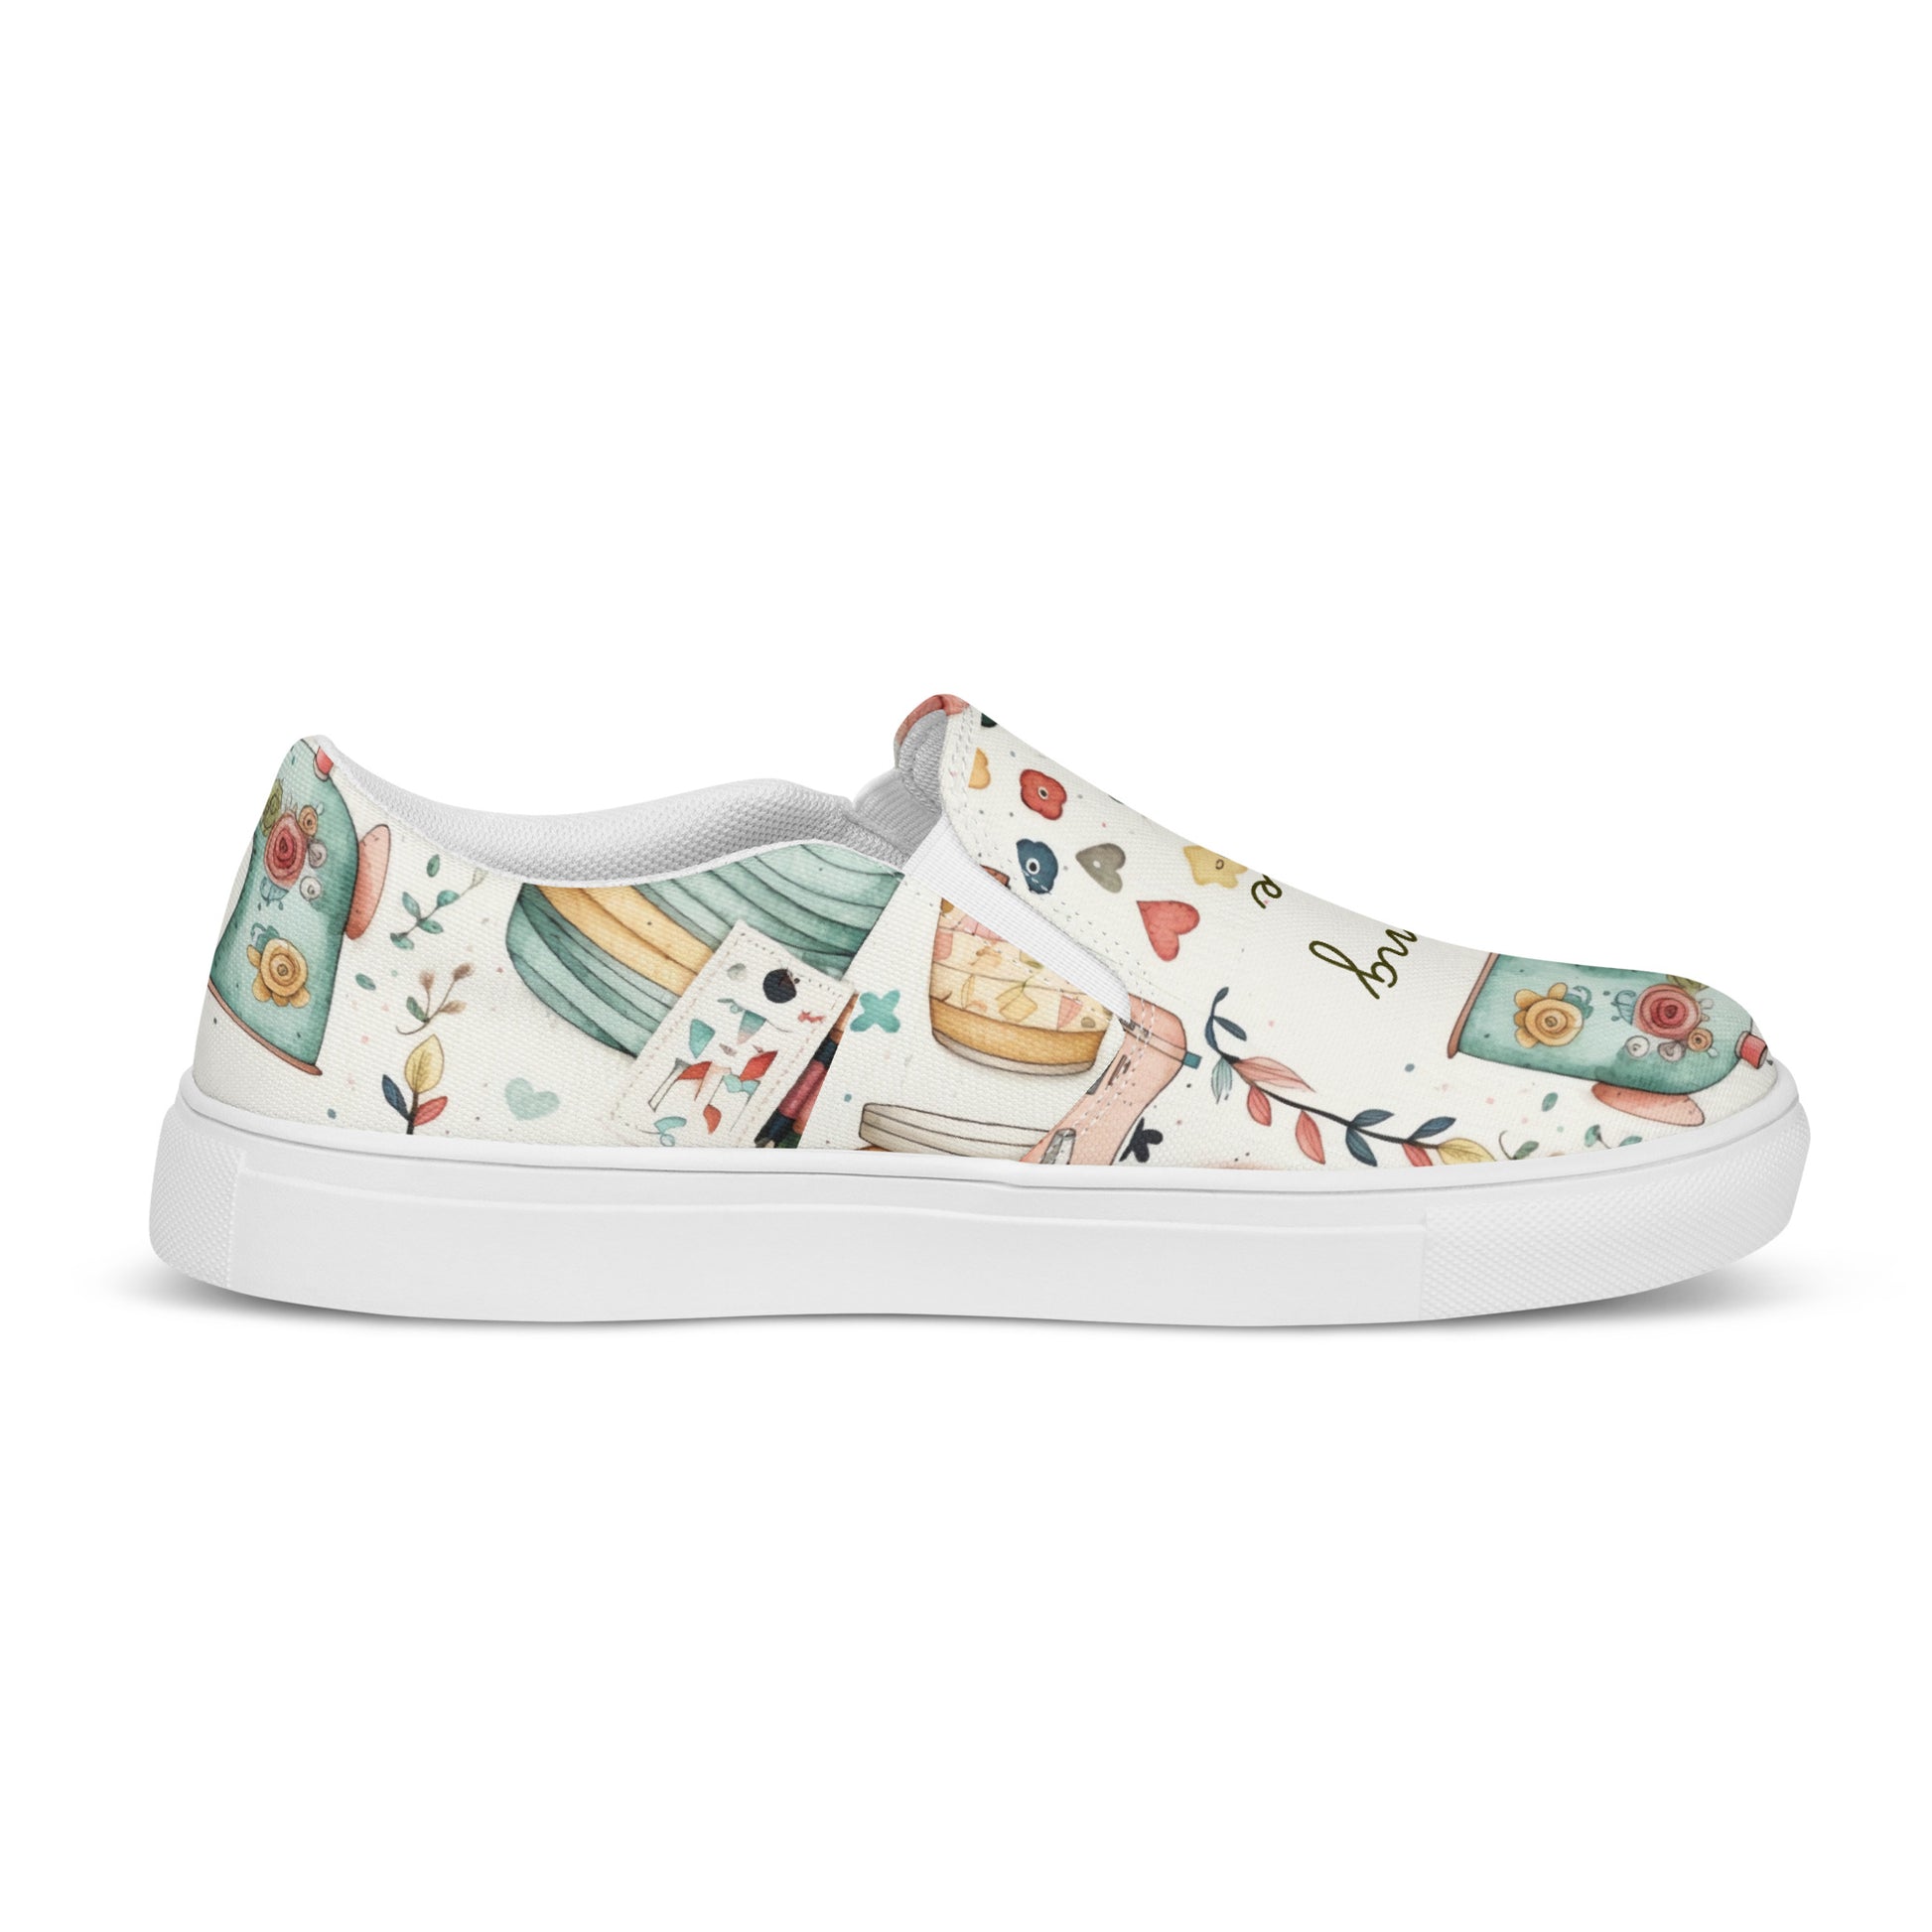 Sewing Life Women’s slip-on canvas shoes CedarHill Country Market